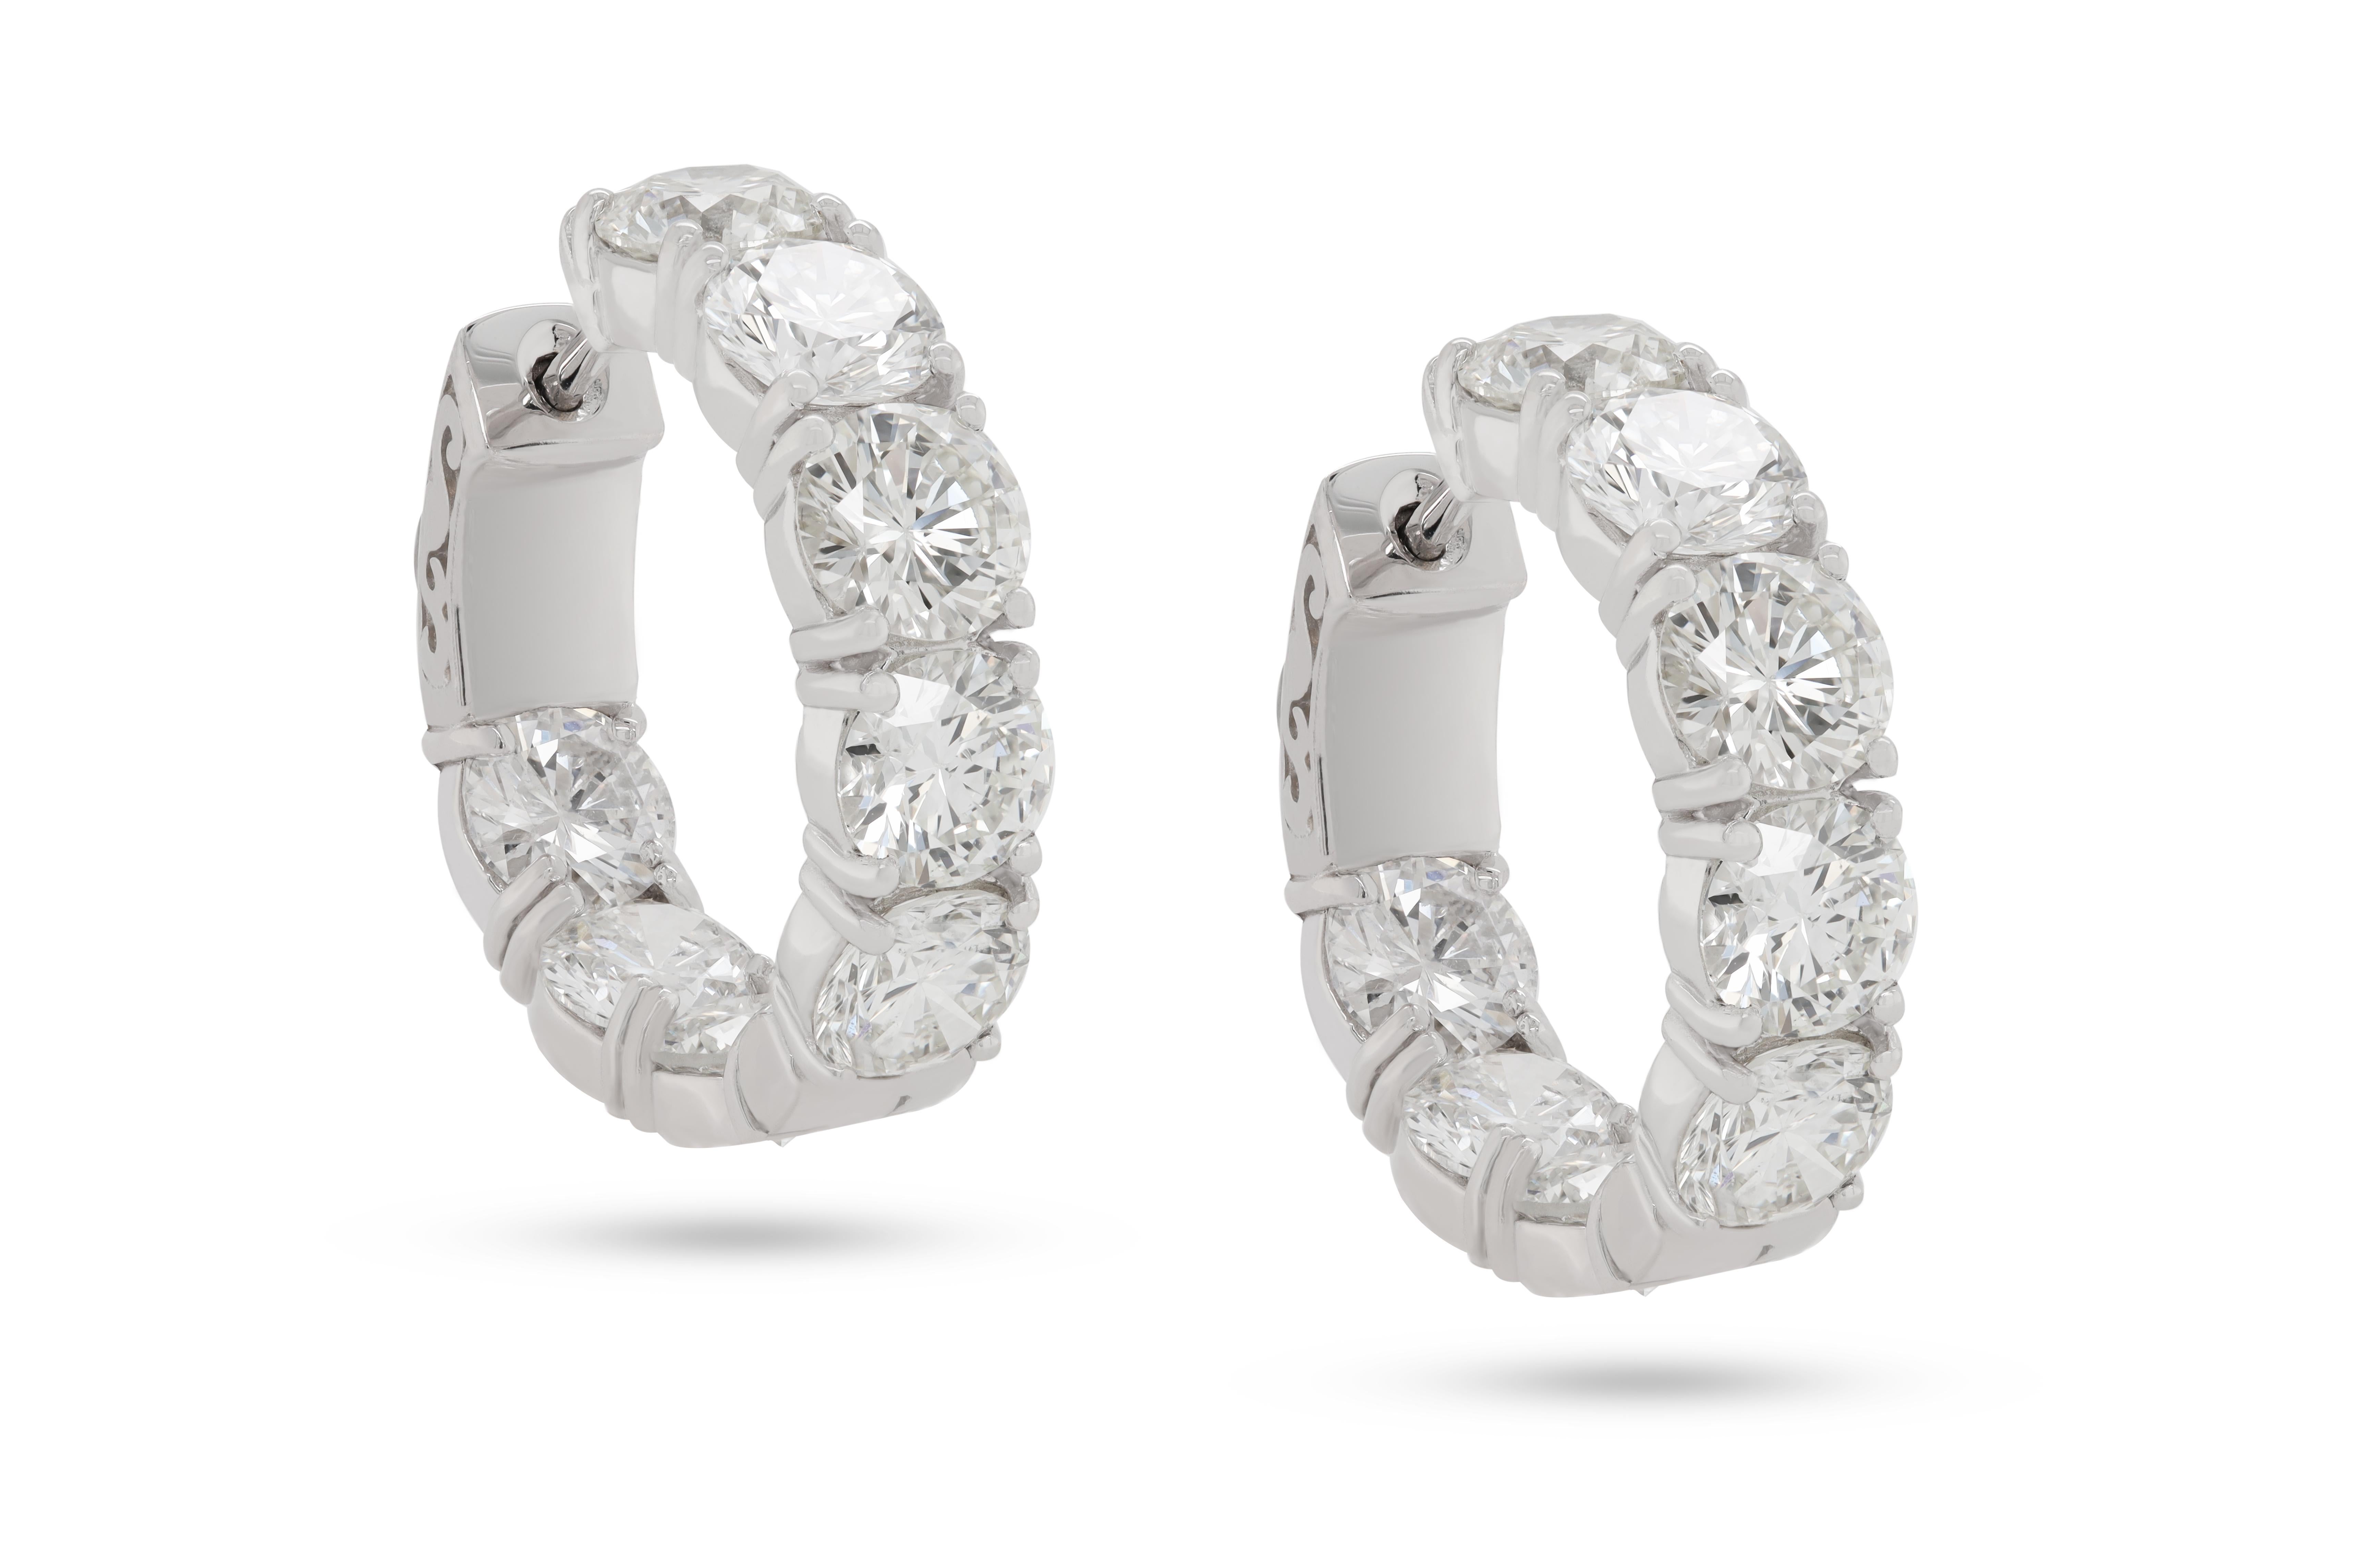 18K White Gold Diamond Earrings featuring 7.35 Carat T.W. of Natural Diamonds

Underline your look with this sharp 18K White Gold Diamond Hoop Earrings. High quality Diamonds. This Earrings will underline your exquisite look for any occasion. 

. is